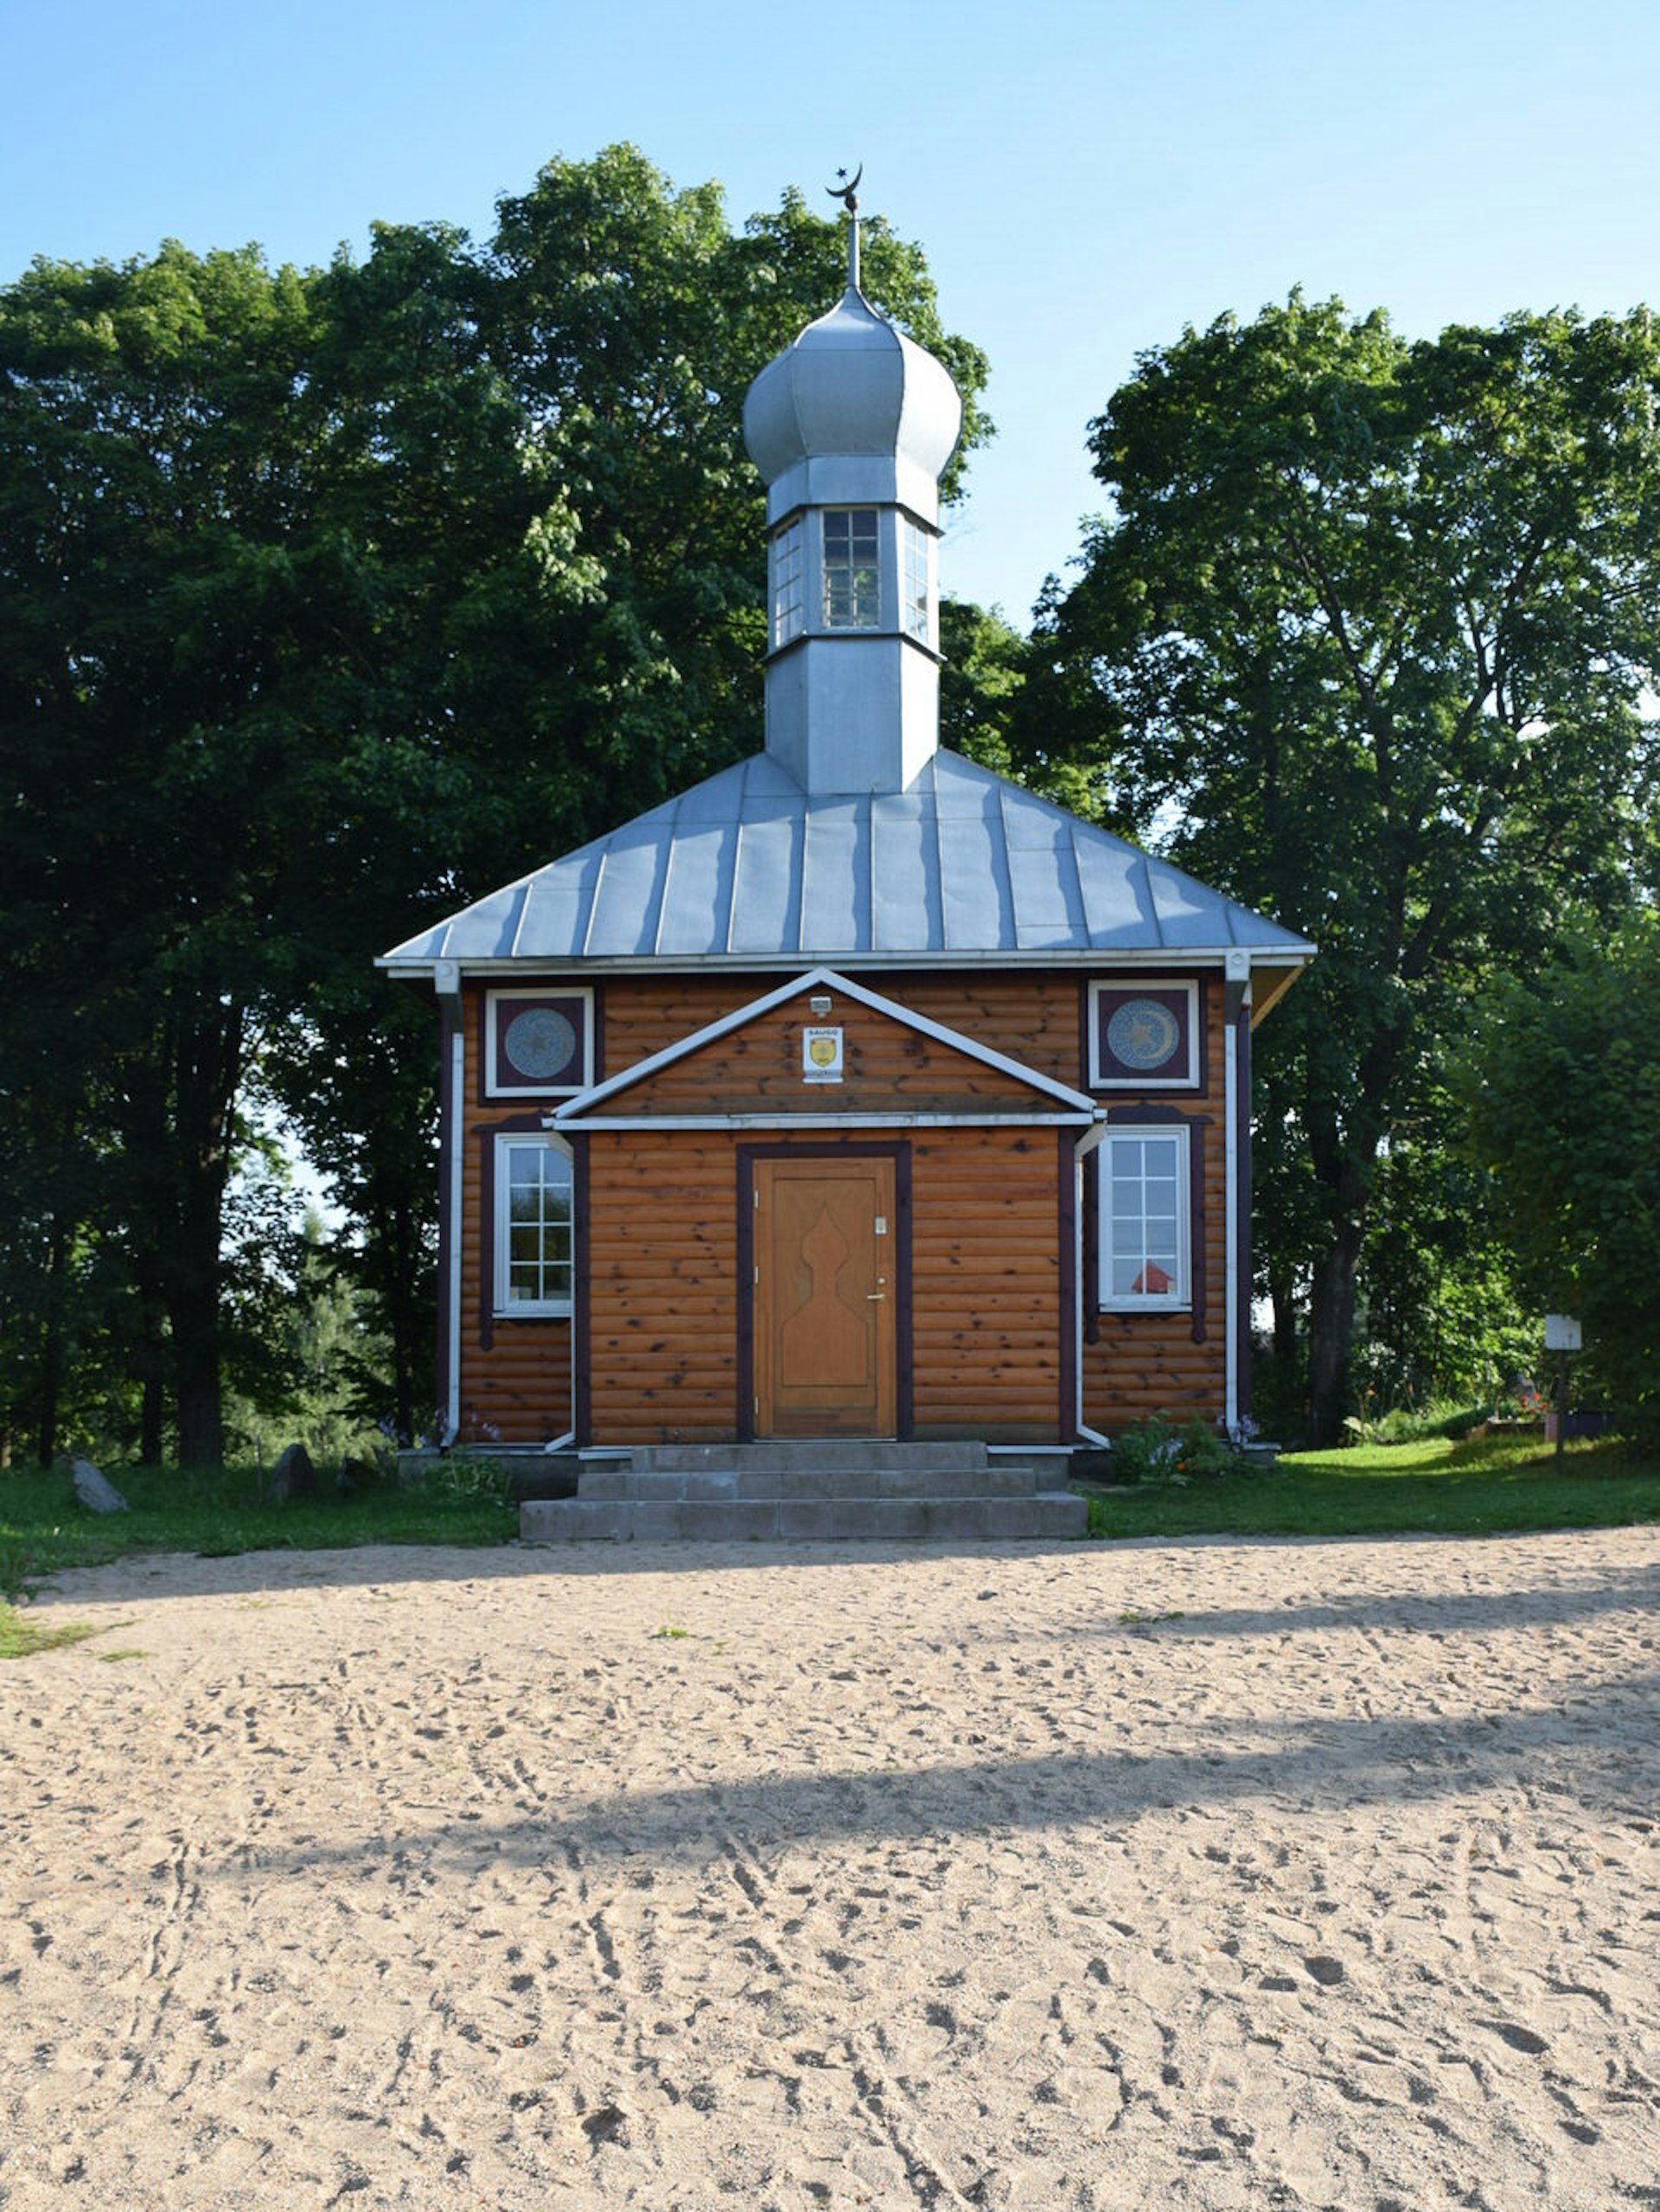 A small simple mosque made from light wood, with a central minaret topped with an onion dome and crescent